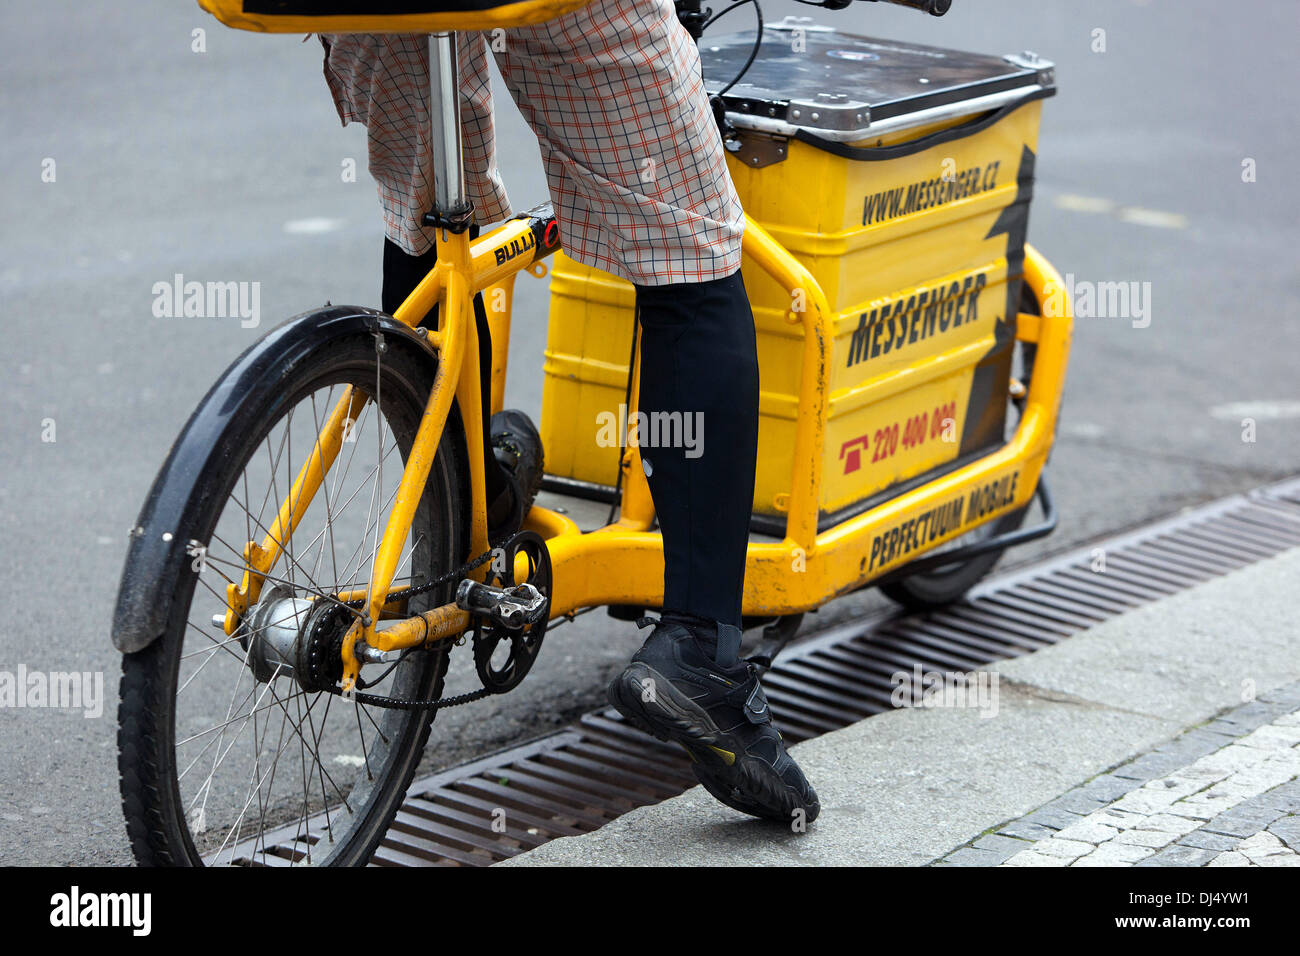 Biker, delivery bike messenger, delivery service in the city bike carrier, cargo bike Stock Photo